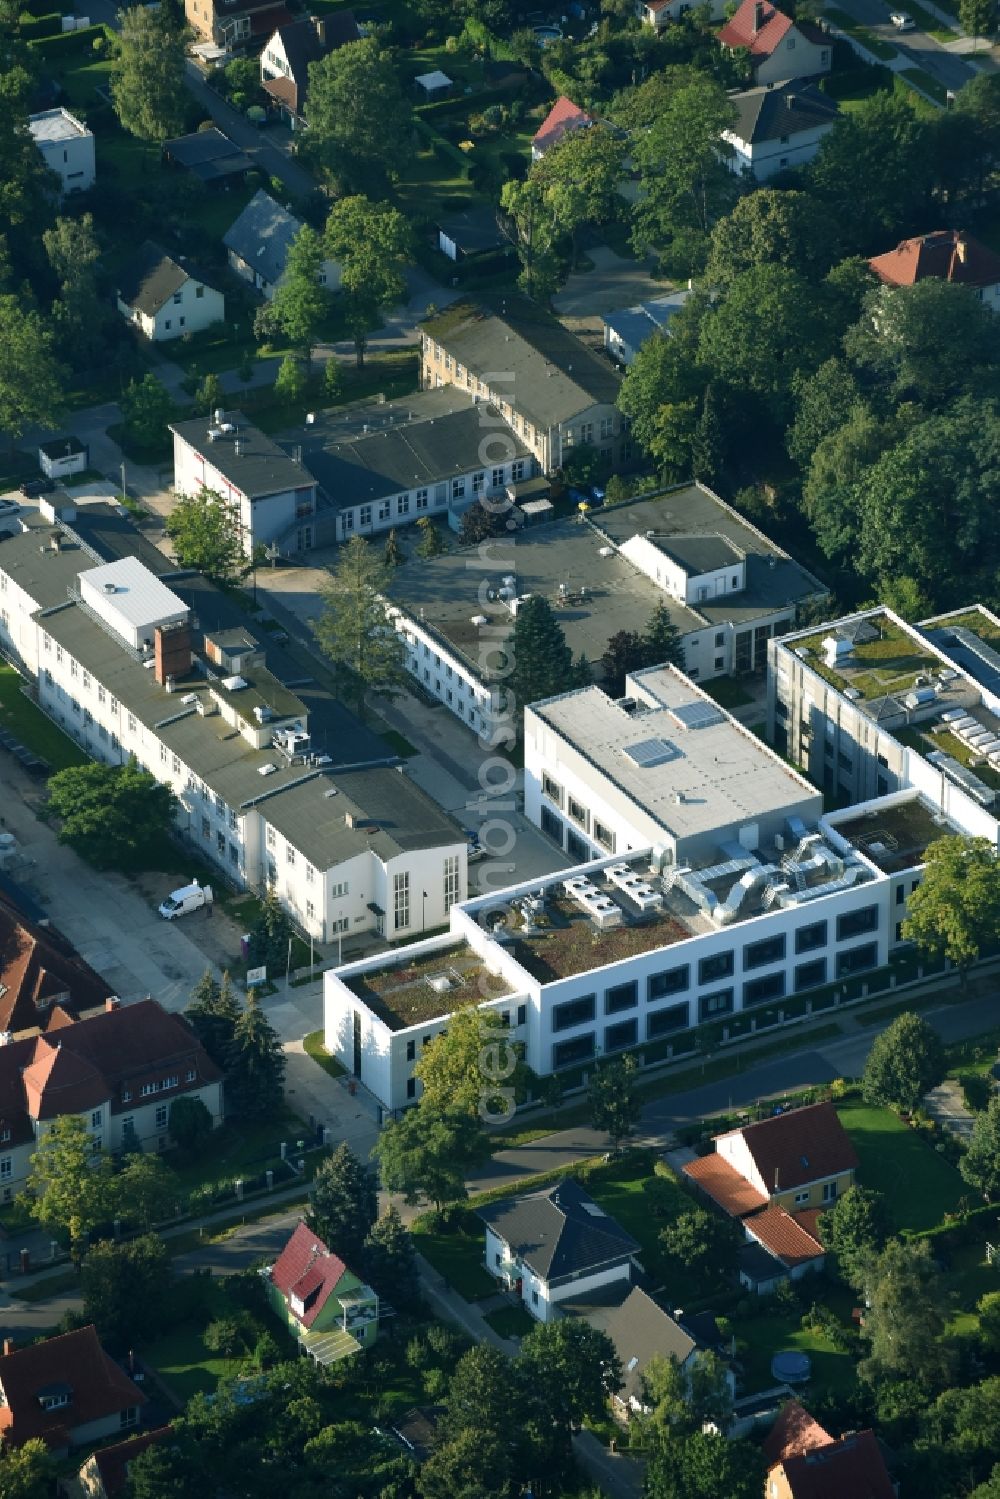 Teltow from above - Research building and office complex of Fraunhofer-Institut fuer Angewondte Polymerforschung IAP, Forschungsbereich Polymermaterialien and Composite PYCO and of Institut fuer Biomaterialforschung of Helmholtz-Zentrums Geesthacht on Kontstrasse and Schillerstrasse in Teltow in the state Brandenburg, Germany